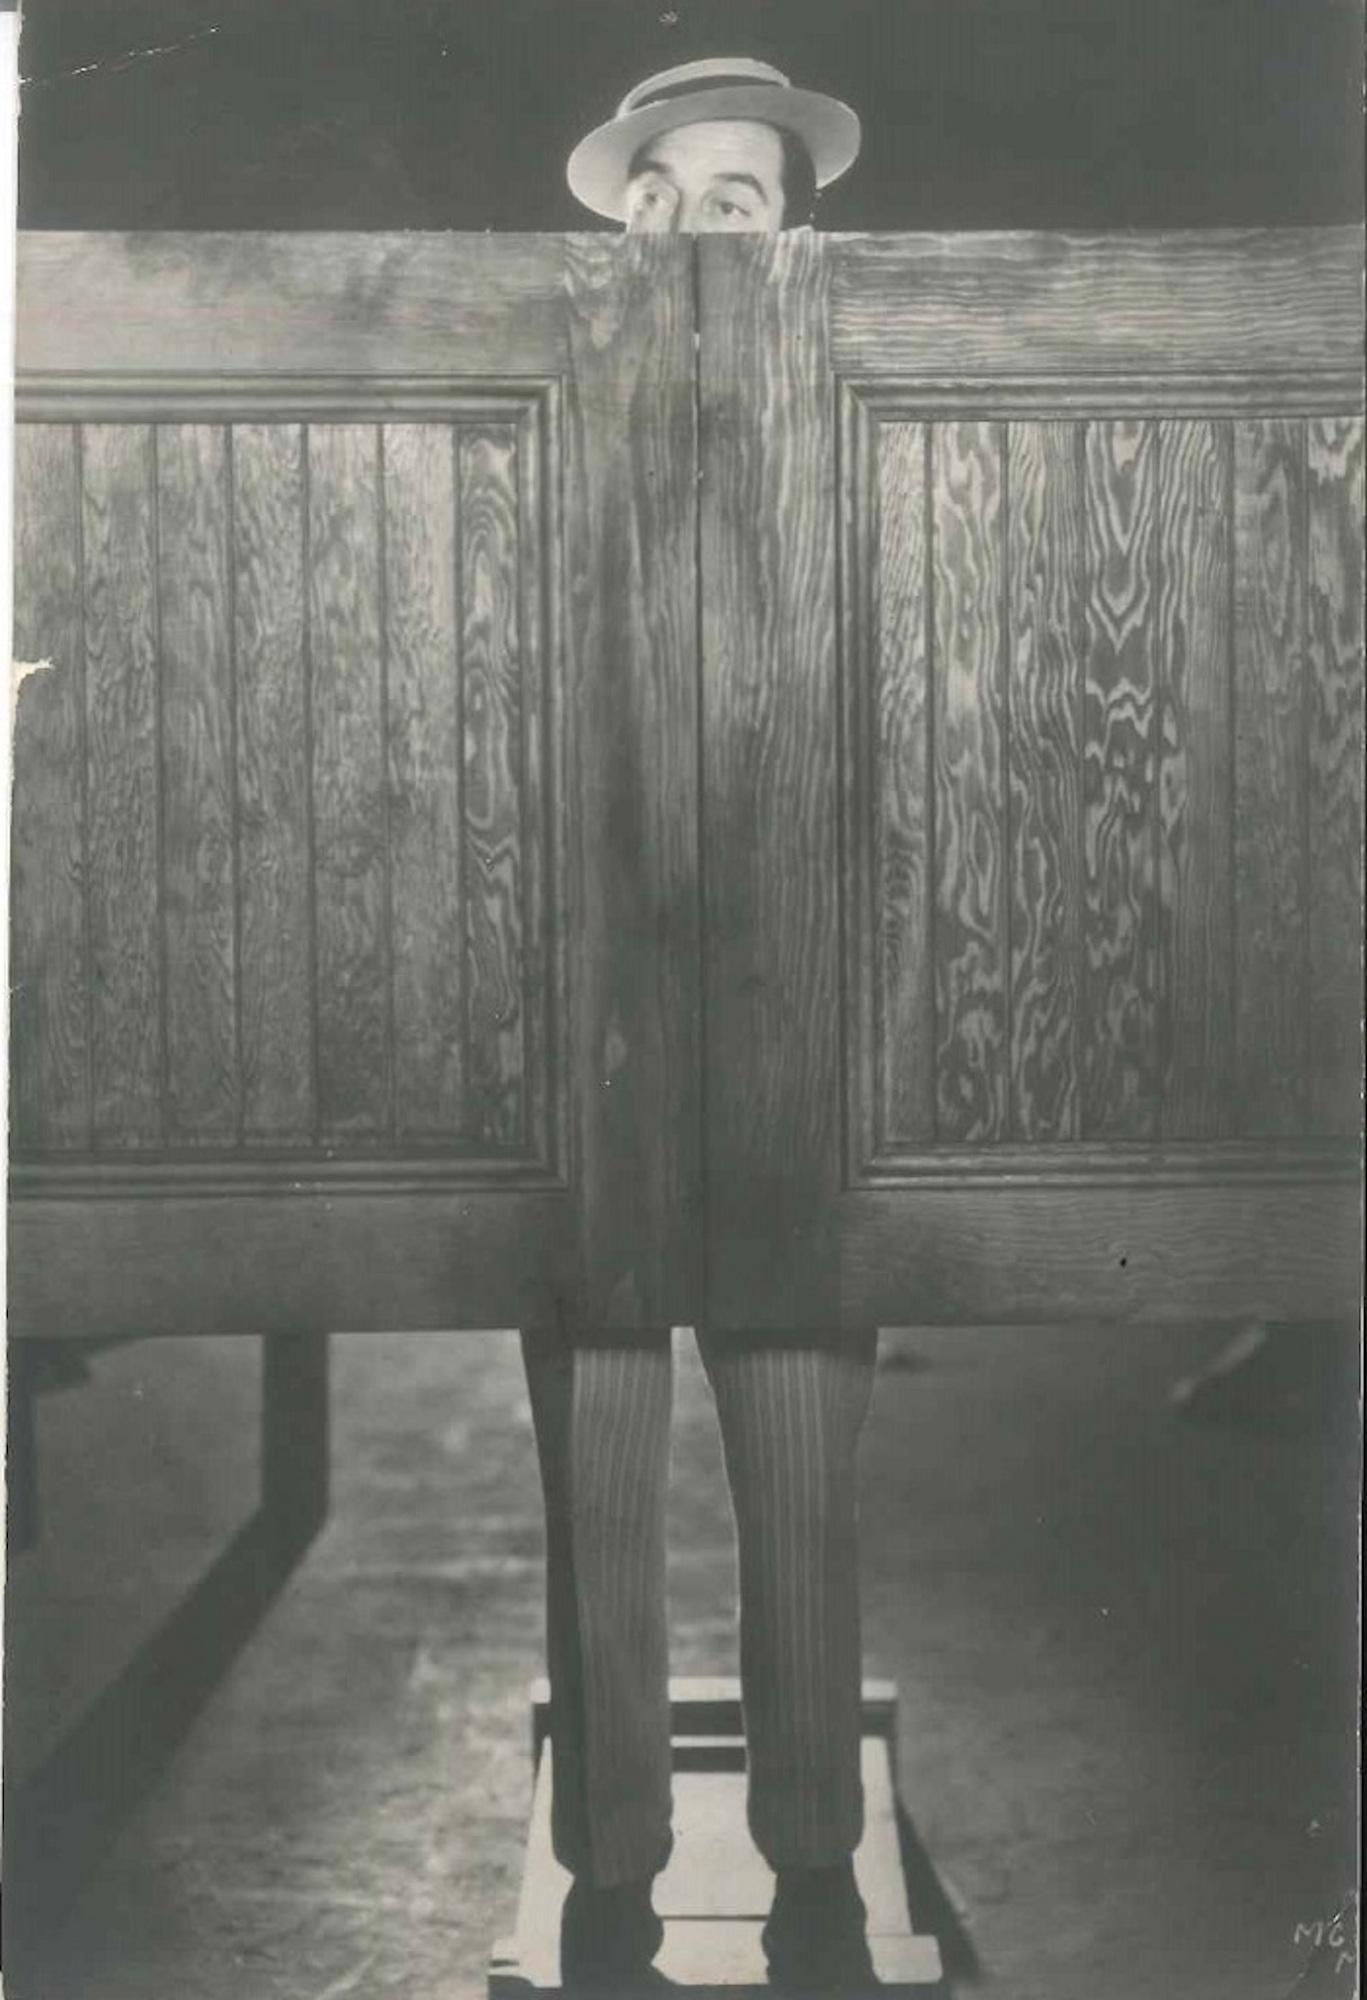 Unknown Black and White Photograph - Gene Kelly Behind the Doors - Original Vintage Photo - 1930s